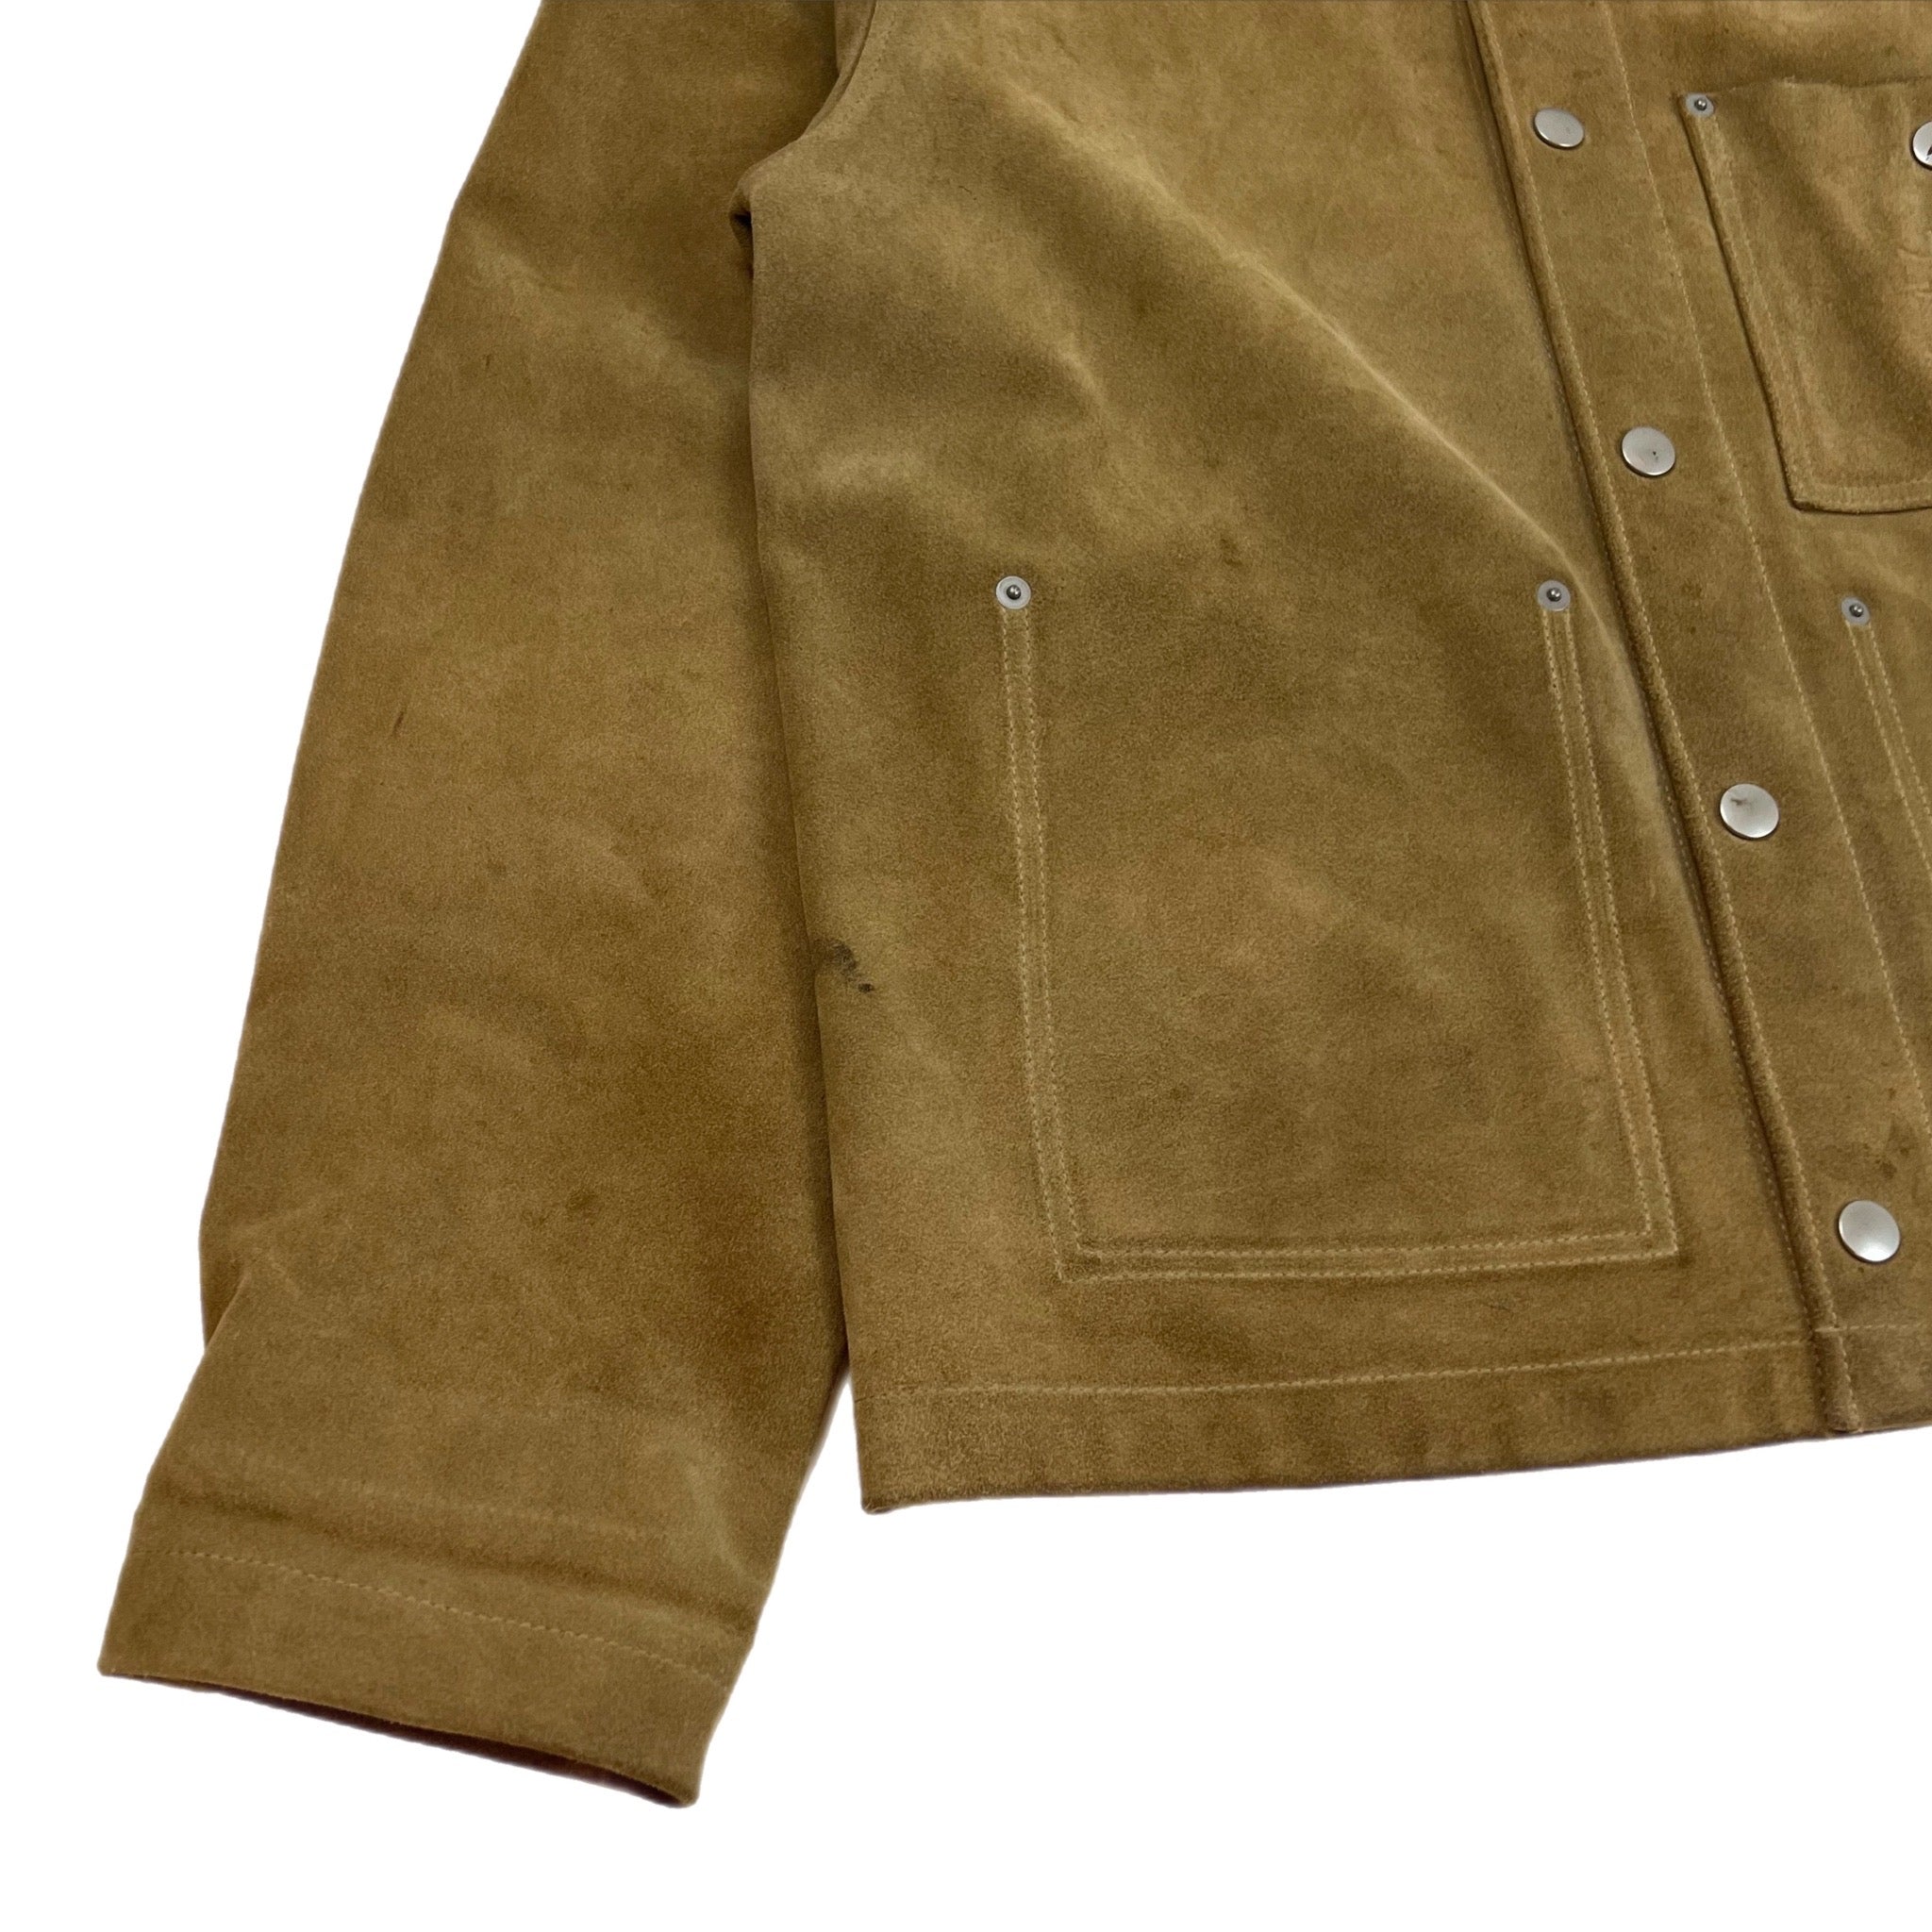 Stussy Cow Suede Jacket SS21 Tan